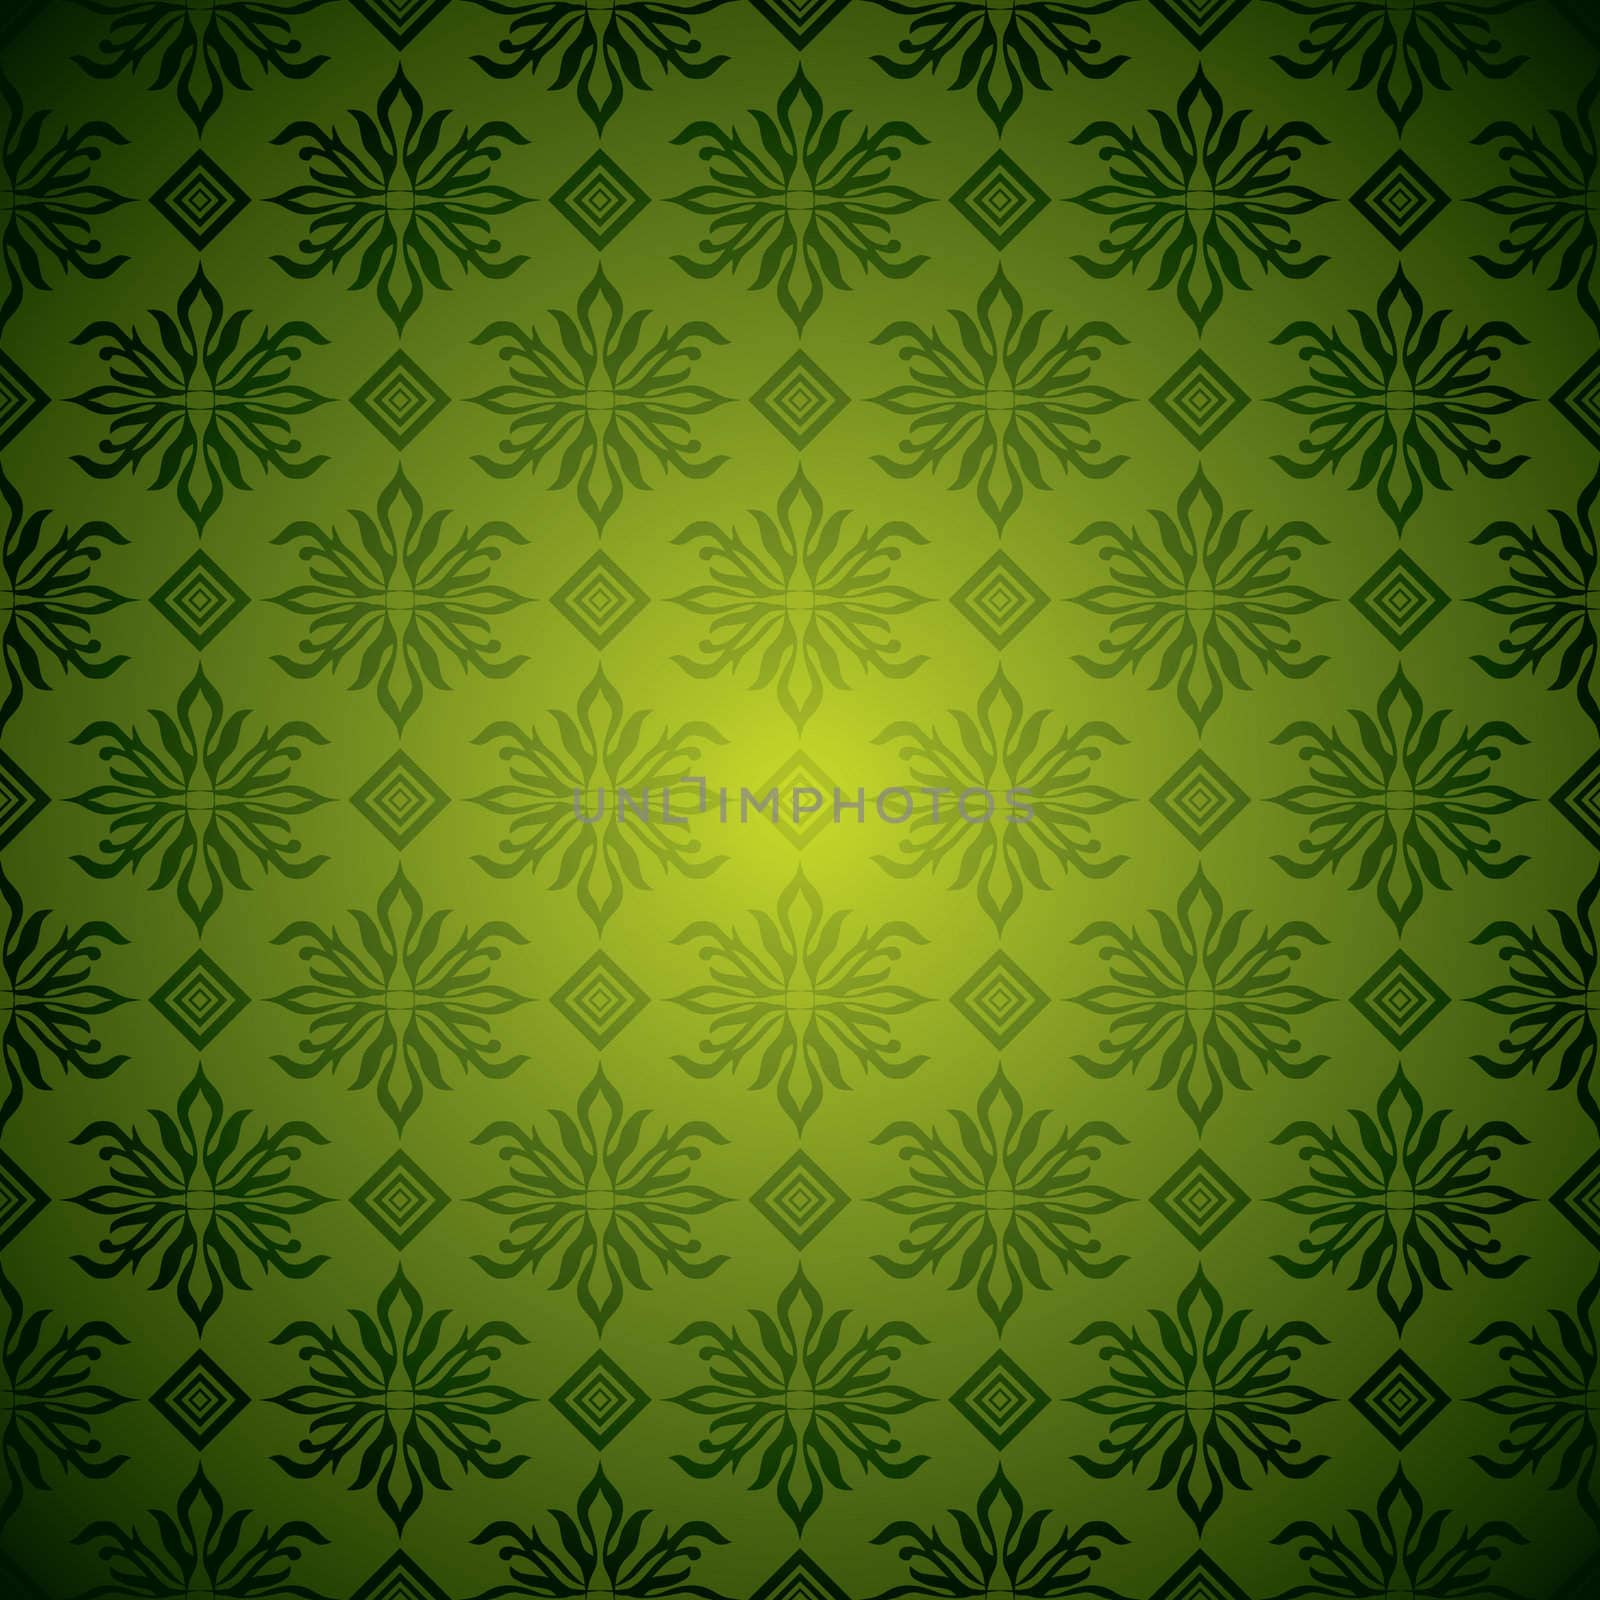 Green and yellow seamless wallpaper design with no join